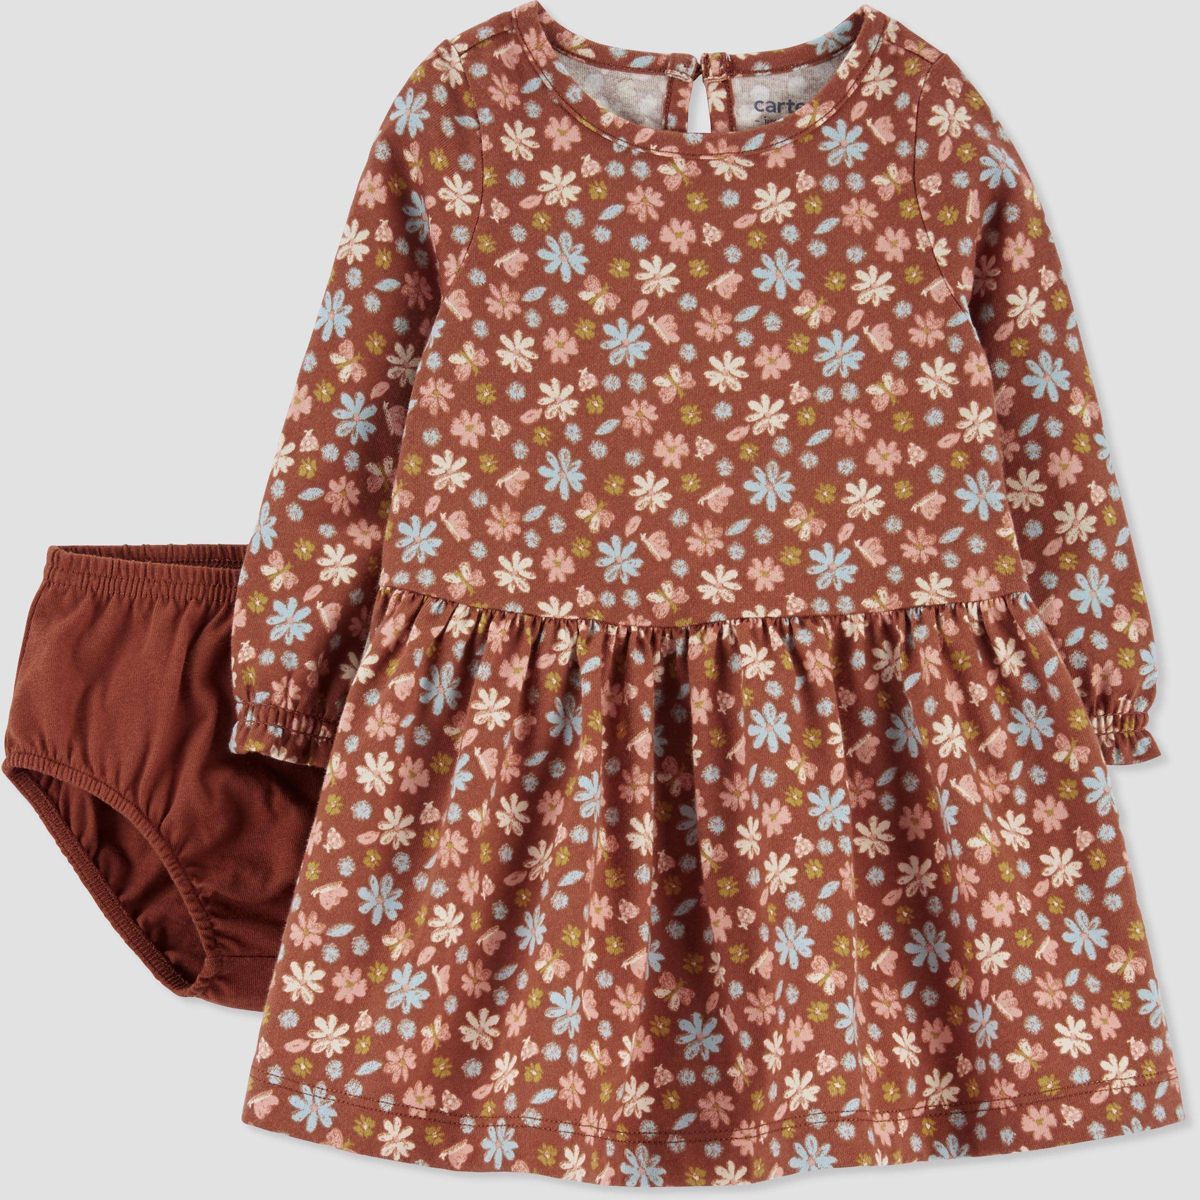 Carter's Just One You®️ Baby Girls' Floral Dress - Brown | Target